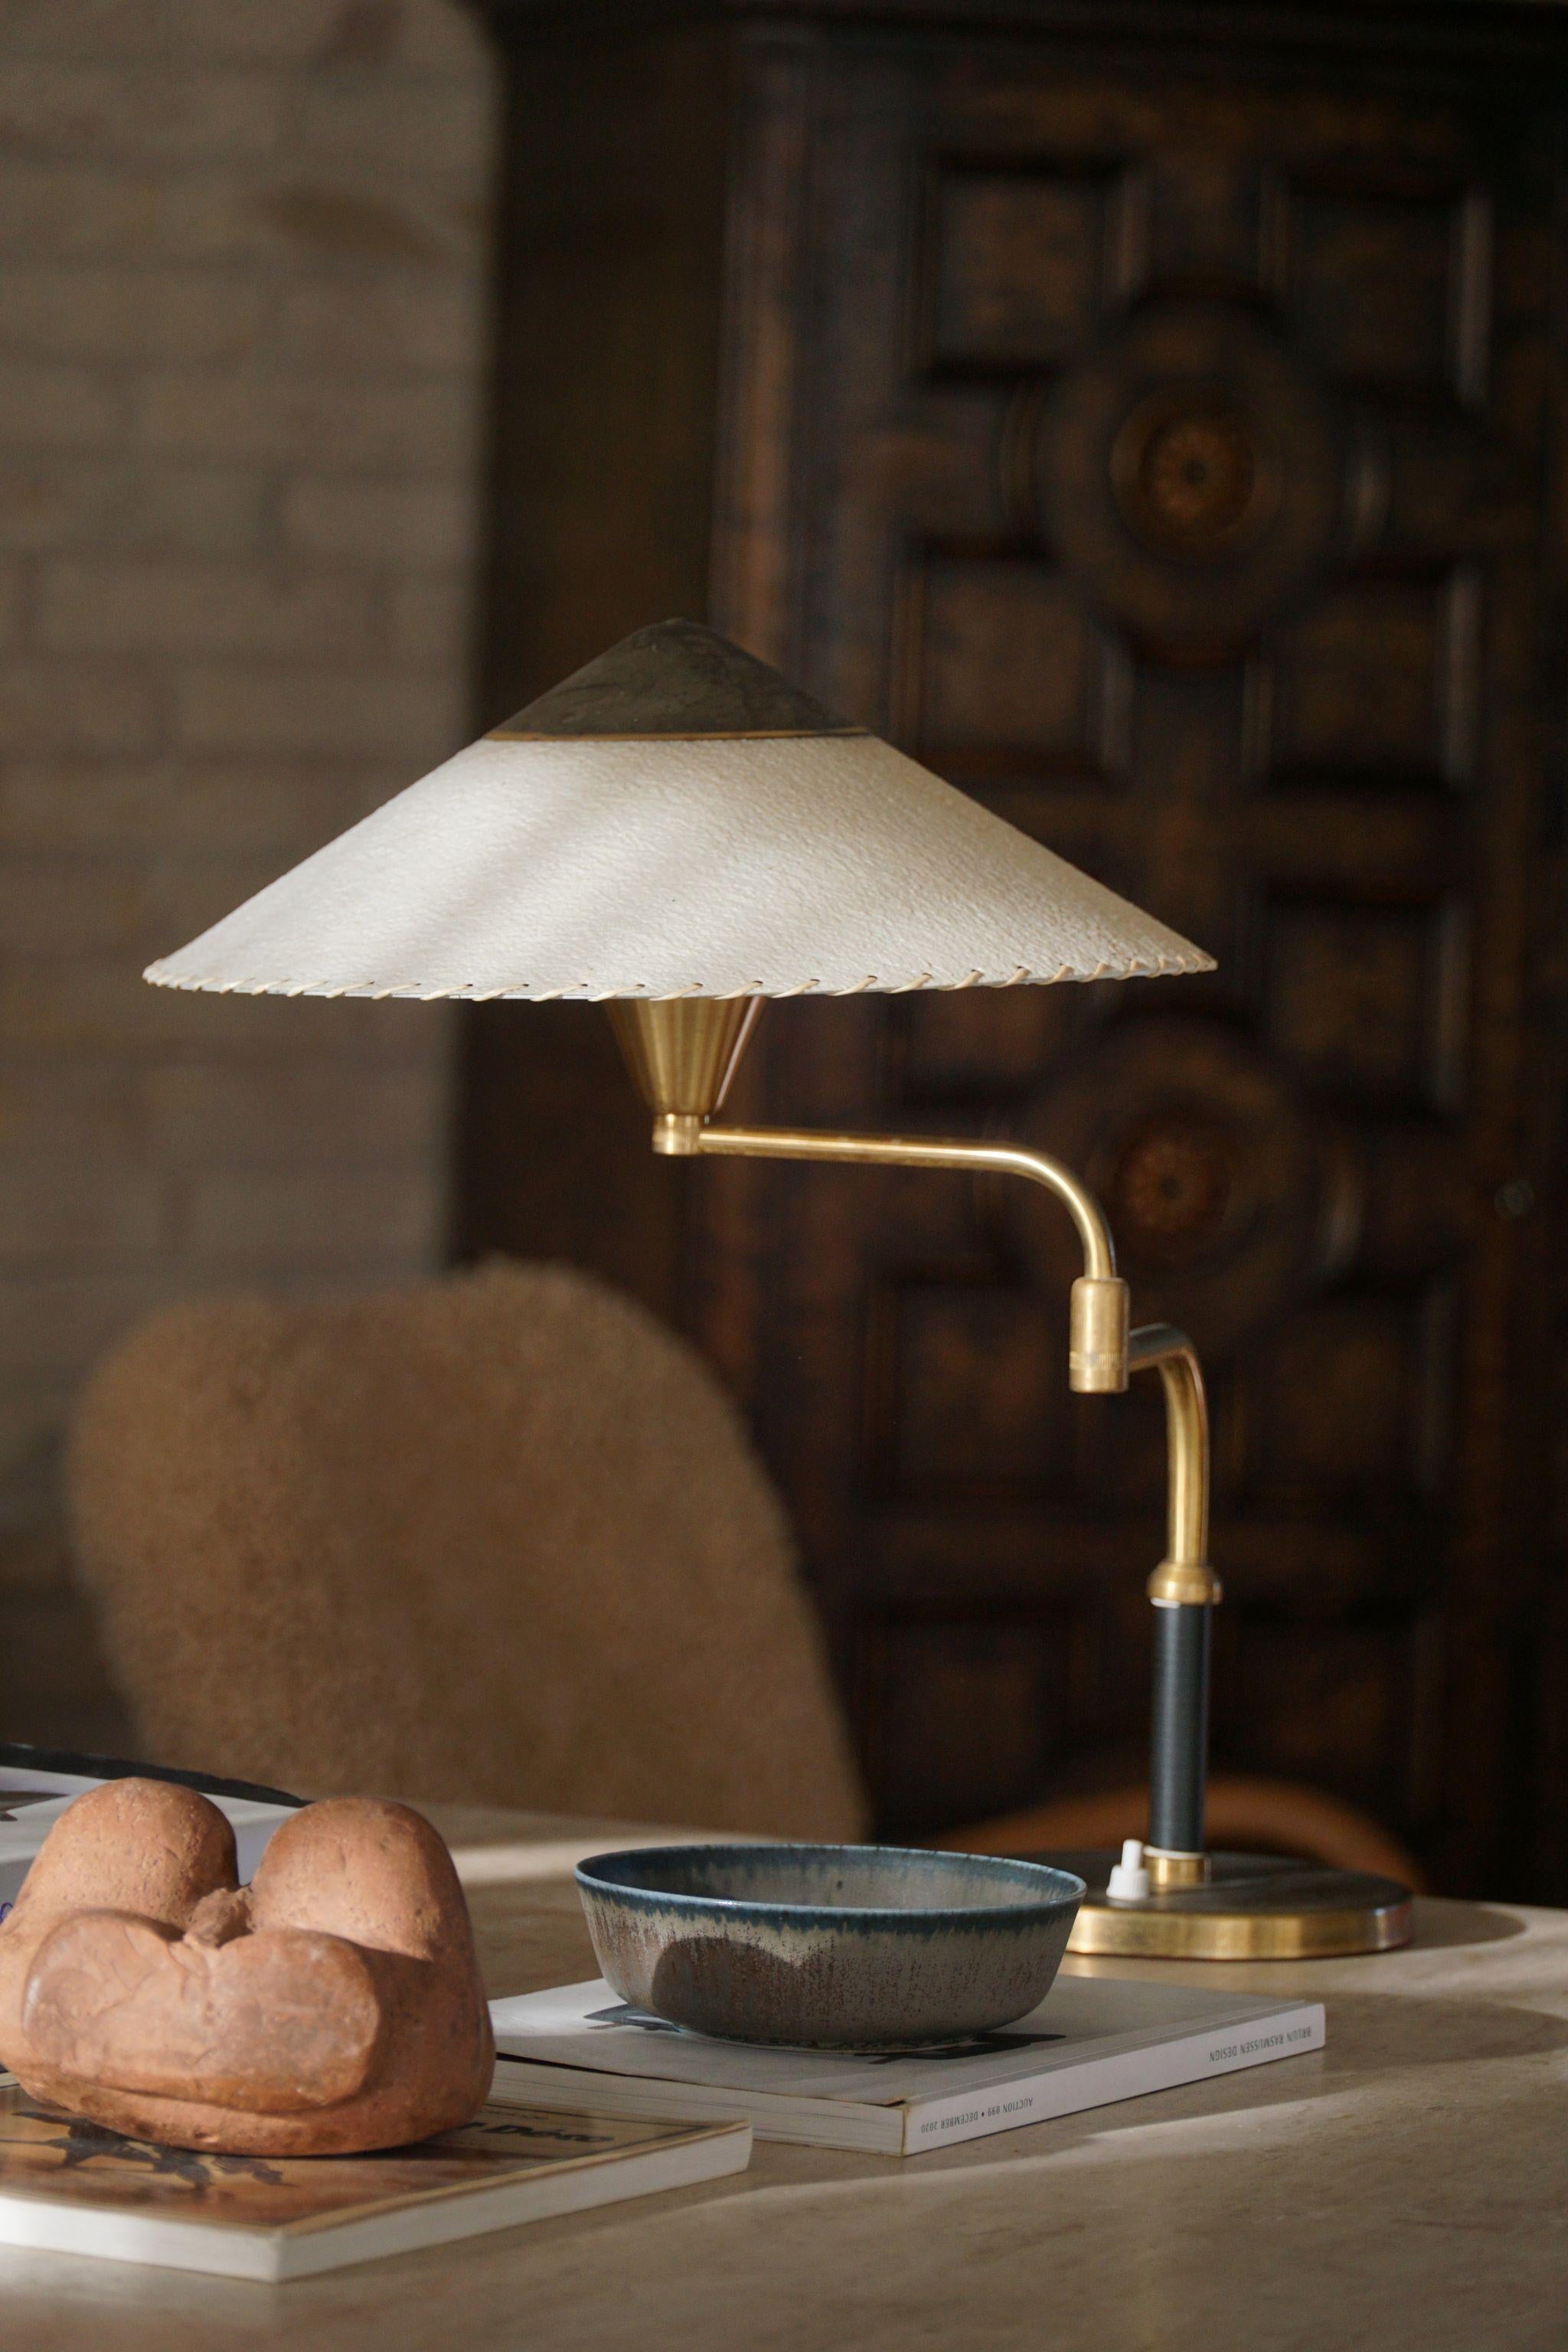 Rare and elegant adjustable table lamp in brass with a paper shade, designed by Bent Karlby for the Danish company LYFA in the 1950s. Crafted with meticulous attention to detail, this lamp embodies the clean lines, functional elegance, and organic